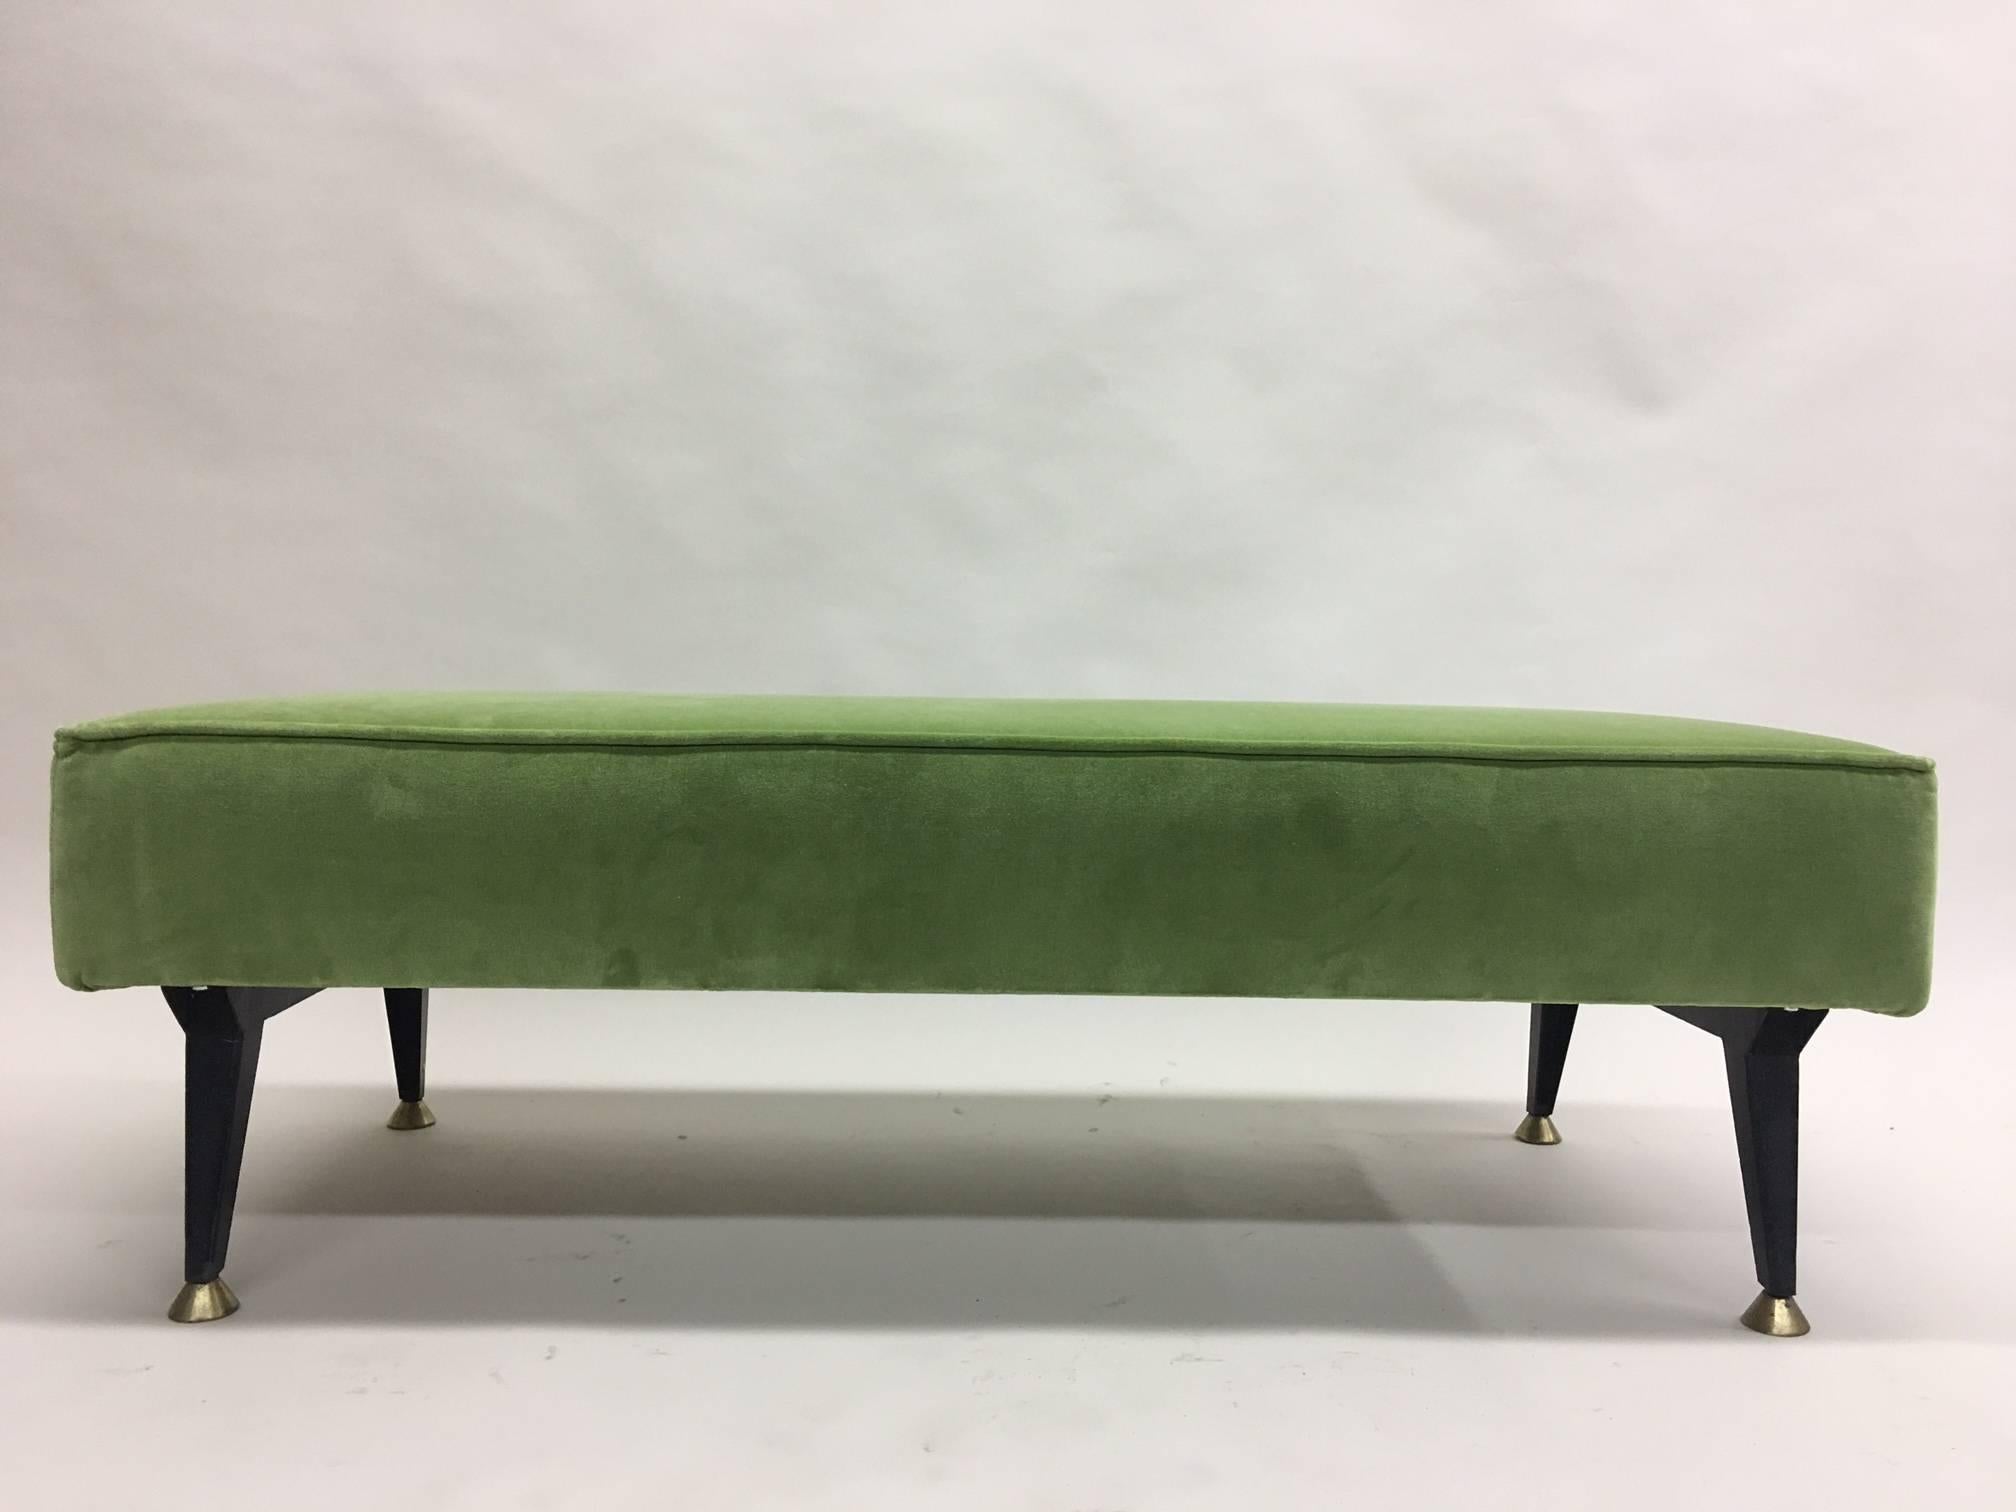 Elegant Italian Mid-Century Modern bench in the style of Osvaldo Borsani featuring four saber form and tapering black enameled metal legs ending in solid brass sabots. The piece is low to the ground, sleek and chic!

New velvet upholstery.